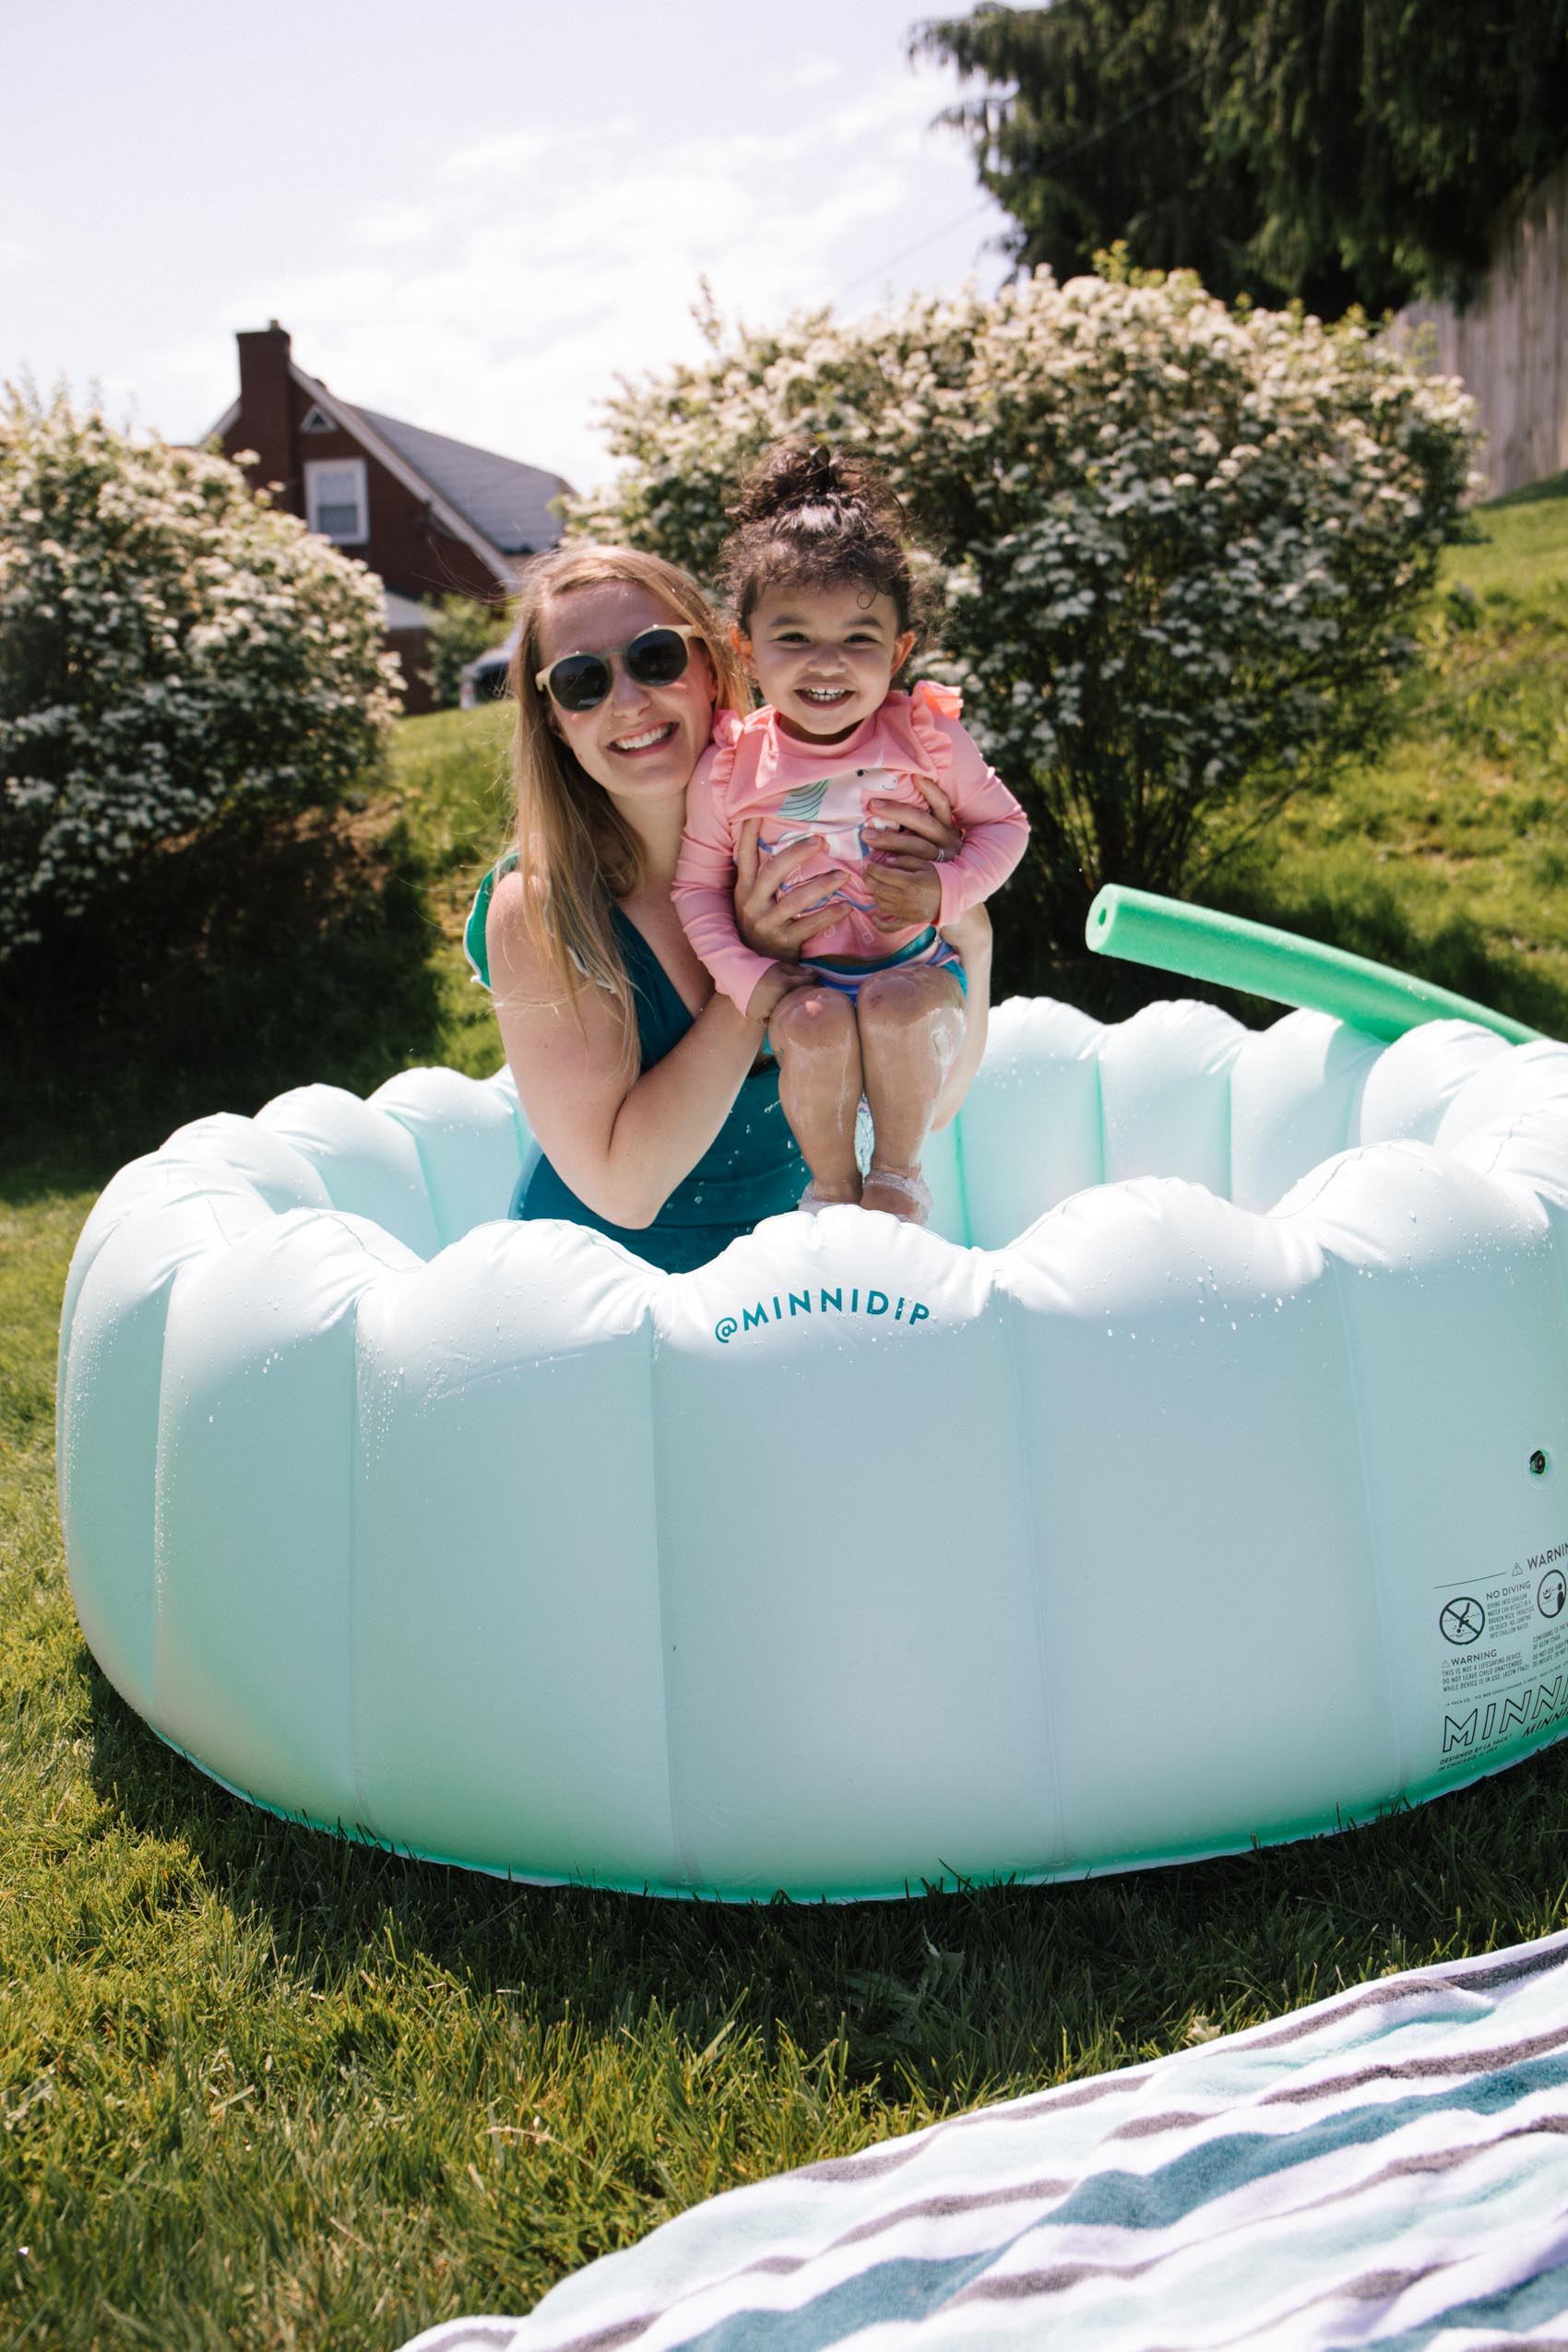 Minnidip pools - the best inflatable pool for everyone in the family to enjoy